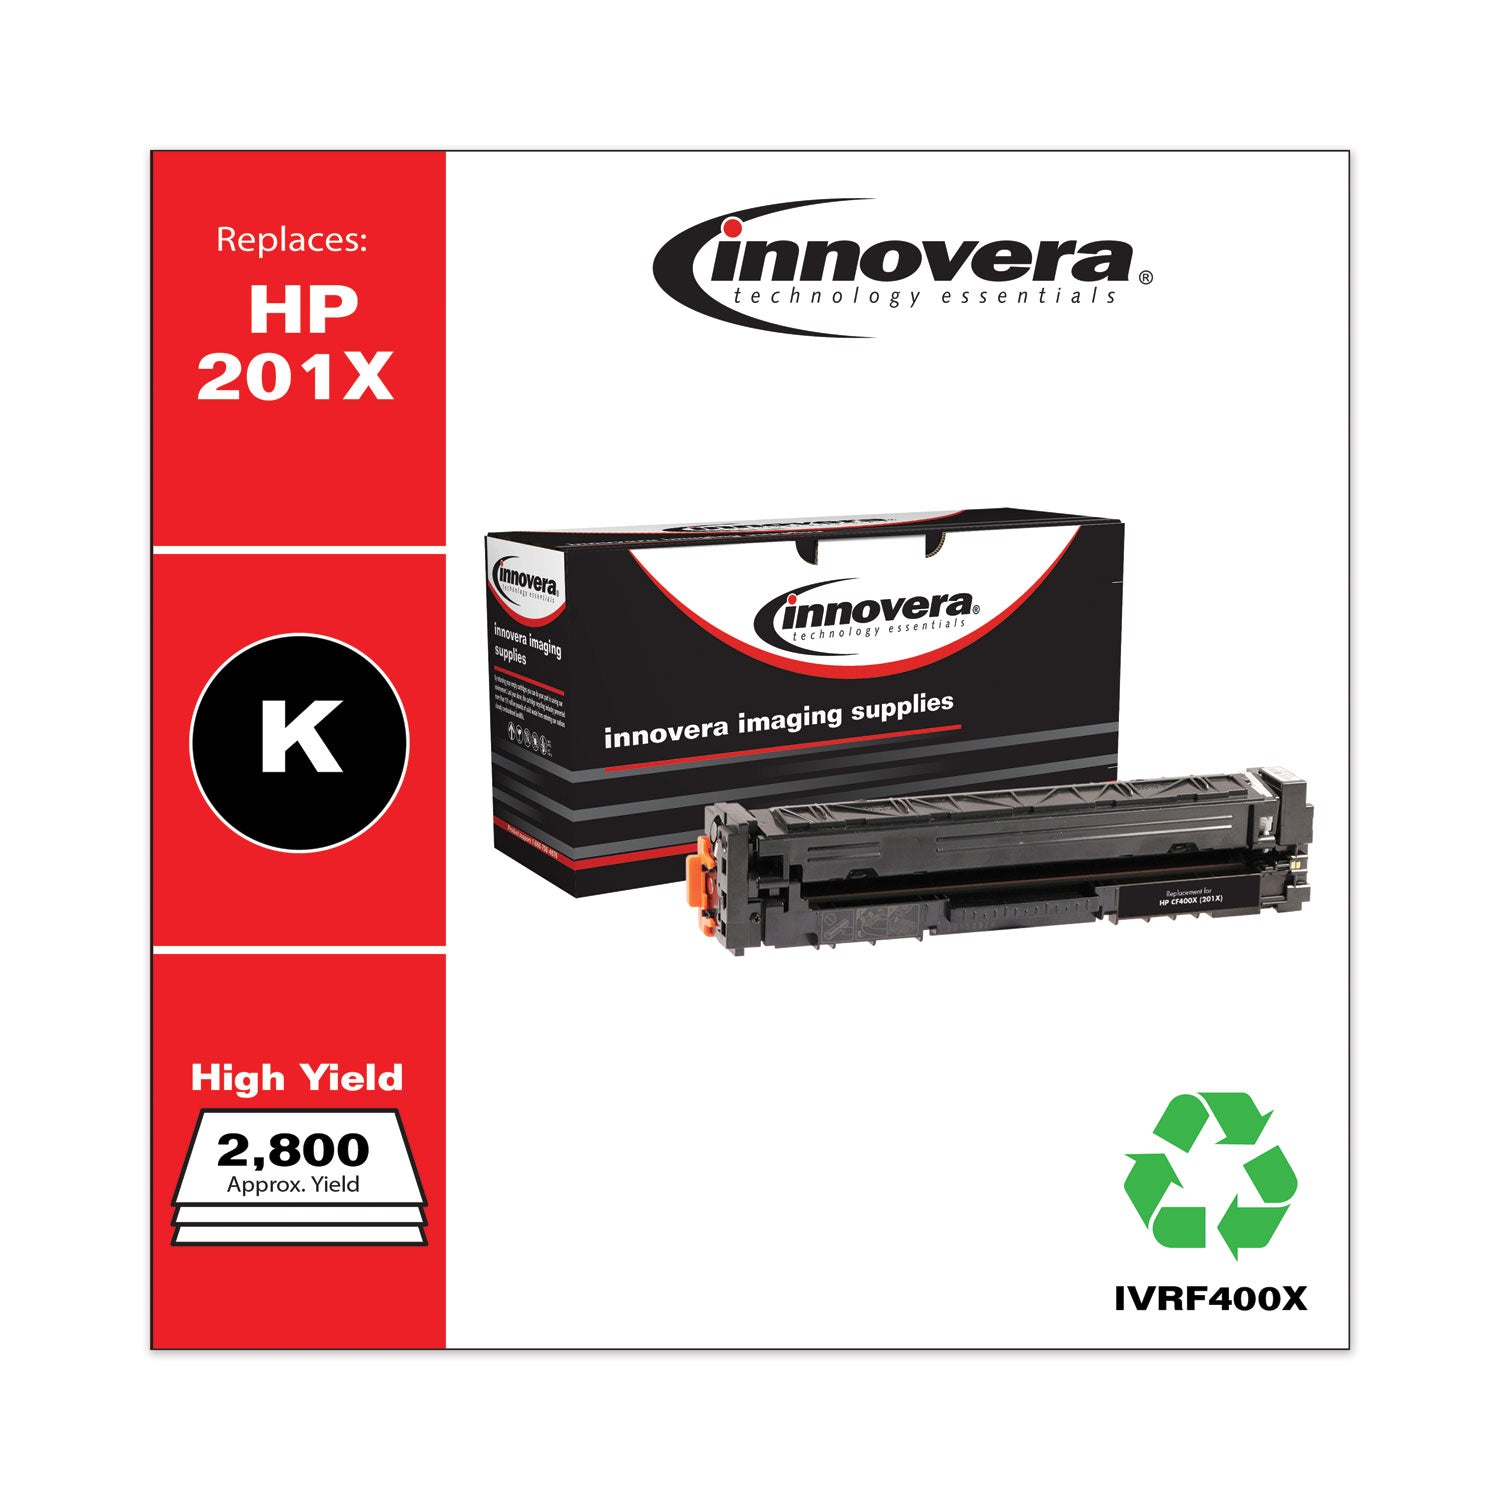 remanufactured-black-high-yield-toner-replacement-for-201x-cf400x-2800-page-yield-ships-in-1-3-business-days_ivrf400x - 2